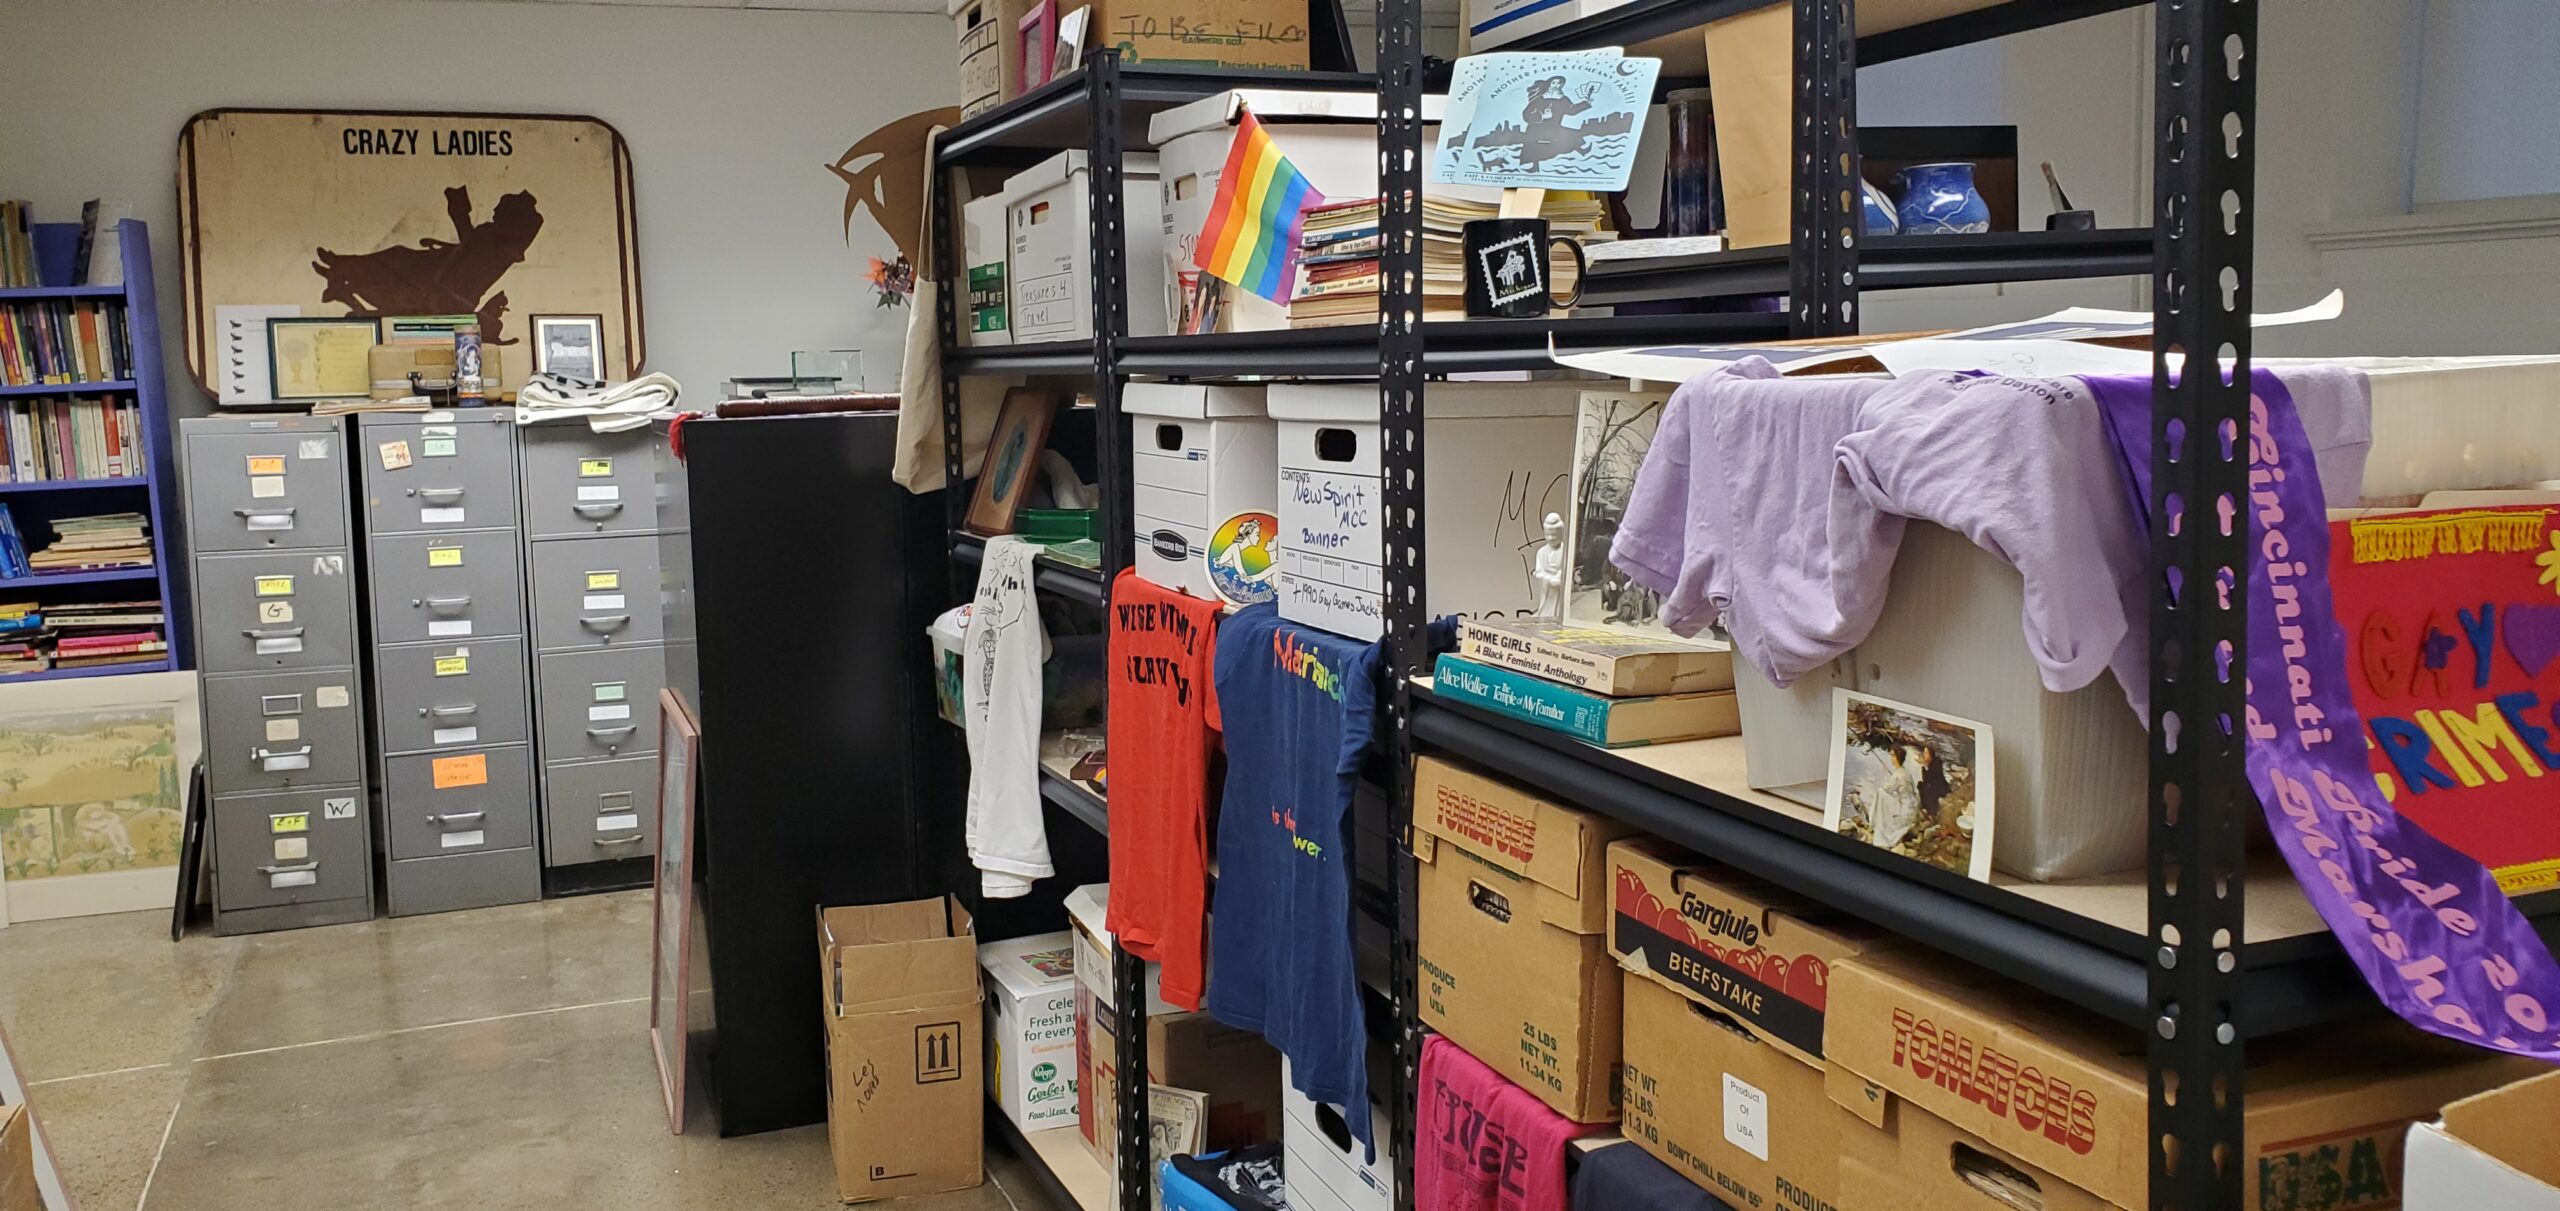 Photograph of interior of Ohio Lesbian Archives with boxes, file cabinets, t-shirts, posters, and ephemera.